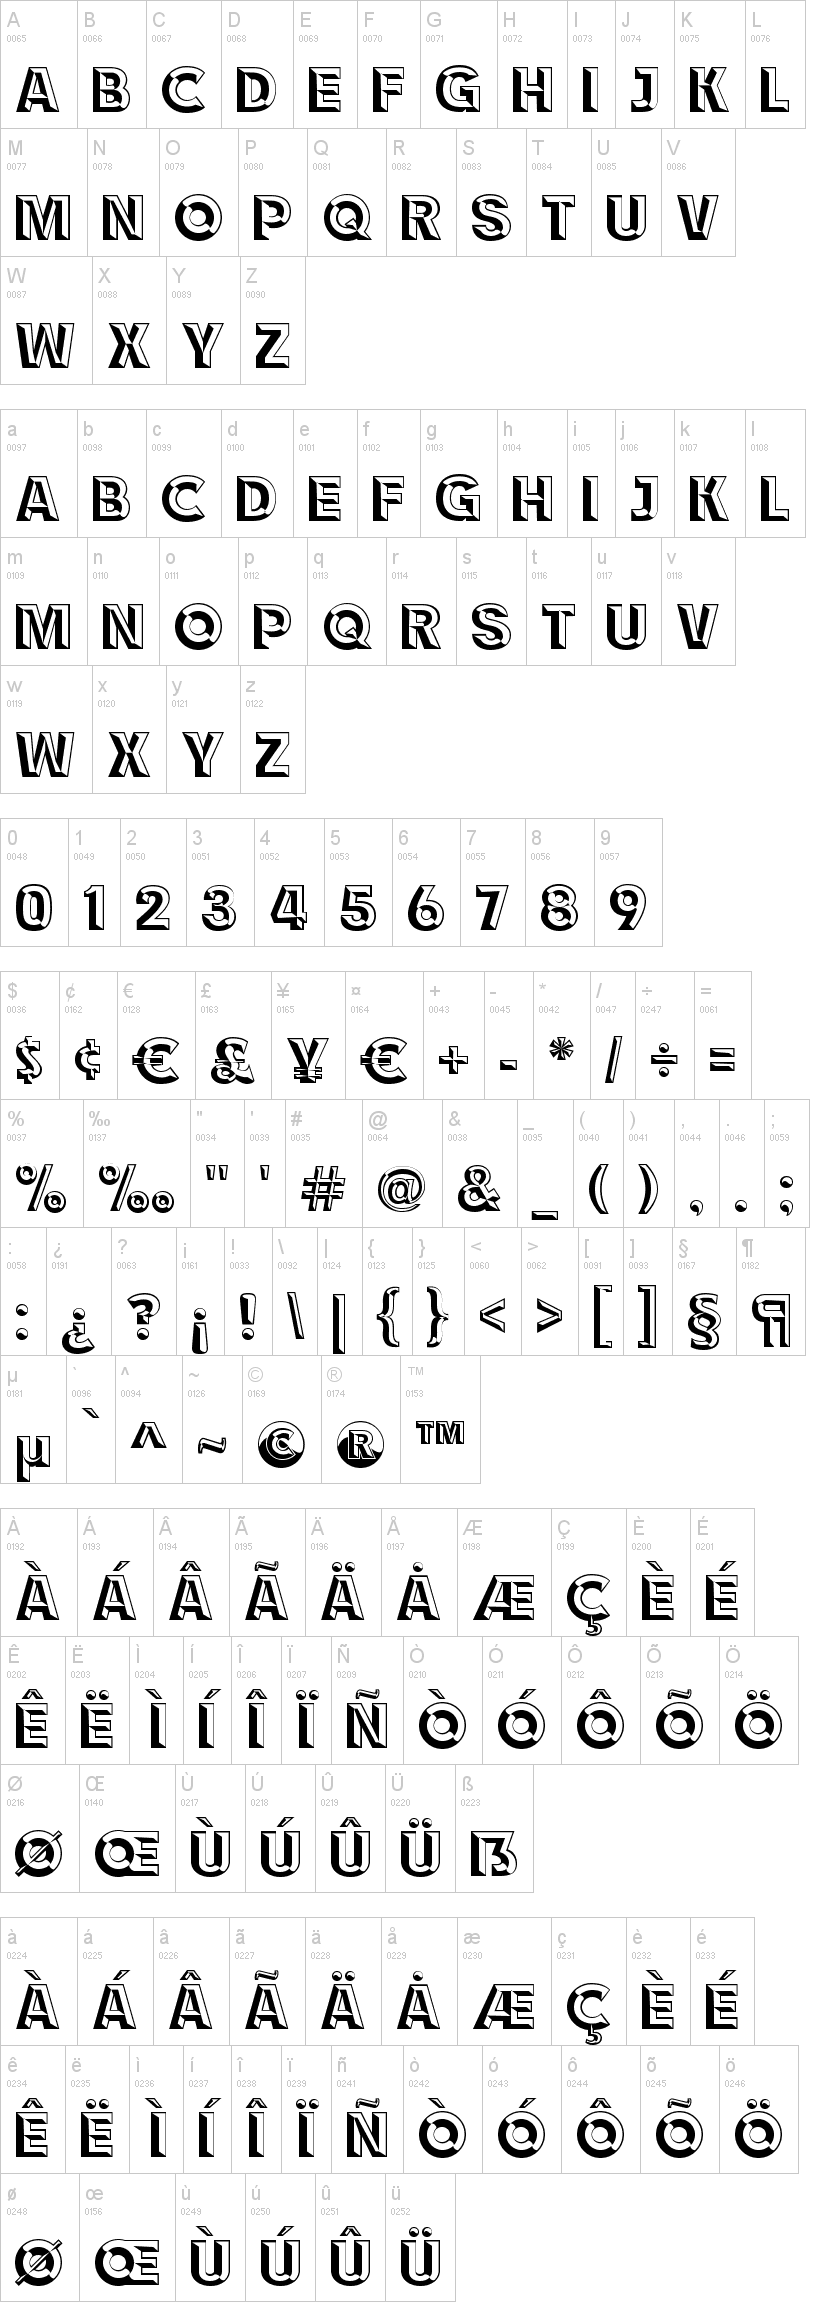 race 1 wave 85 font free download